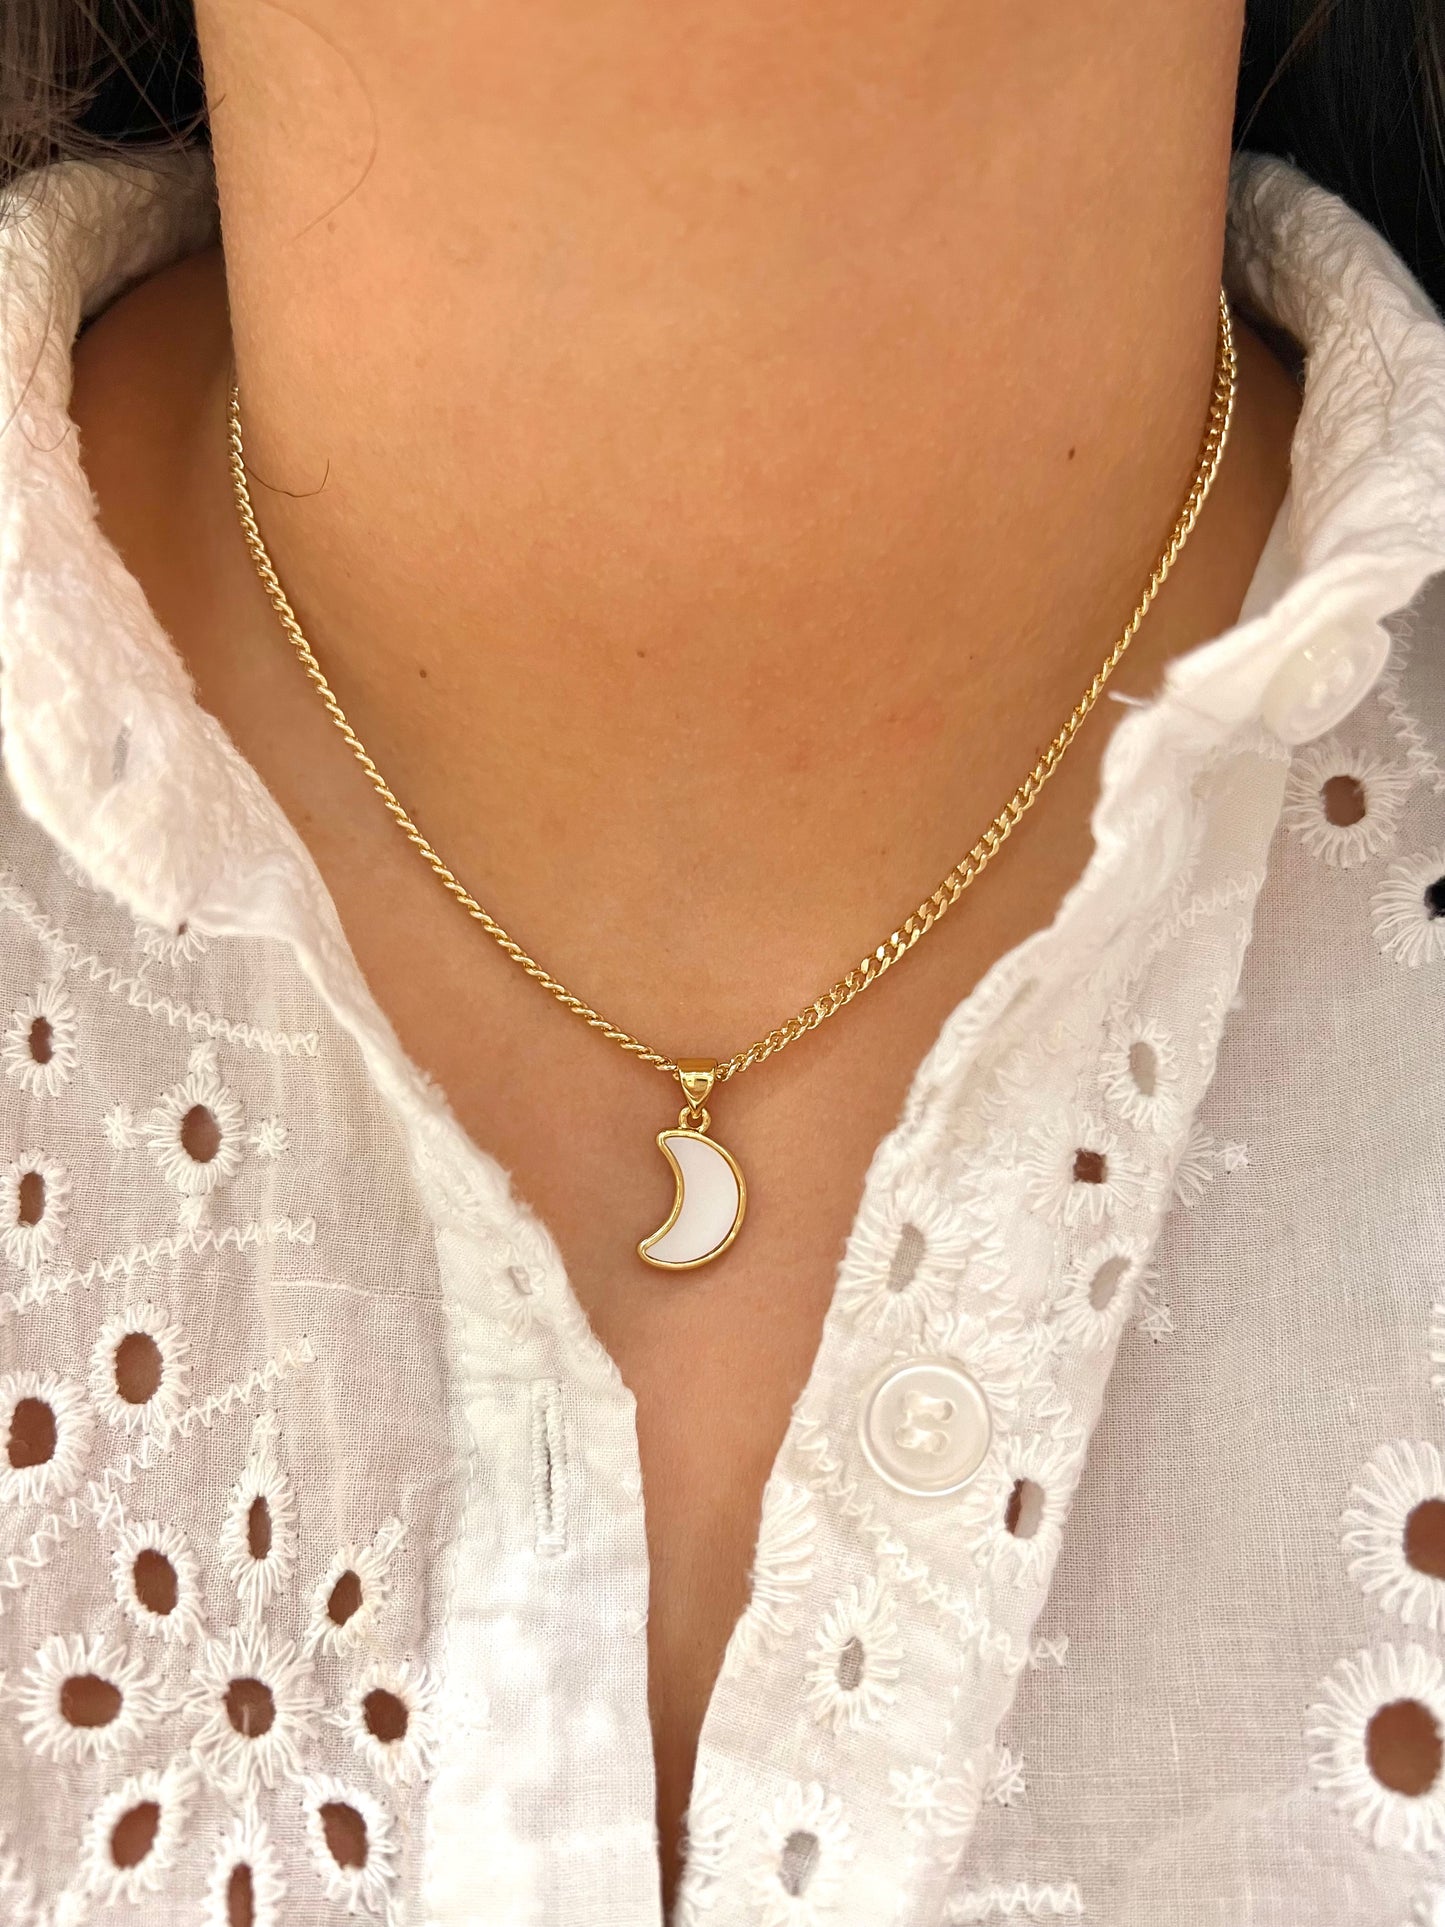 Necklace with moon